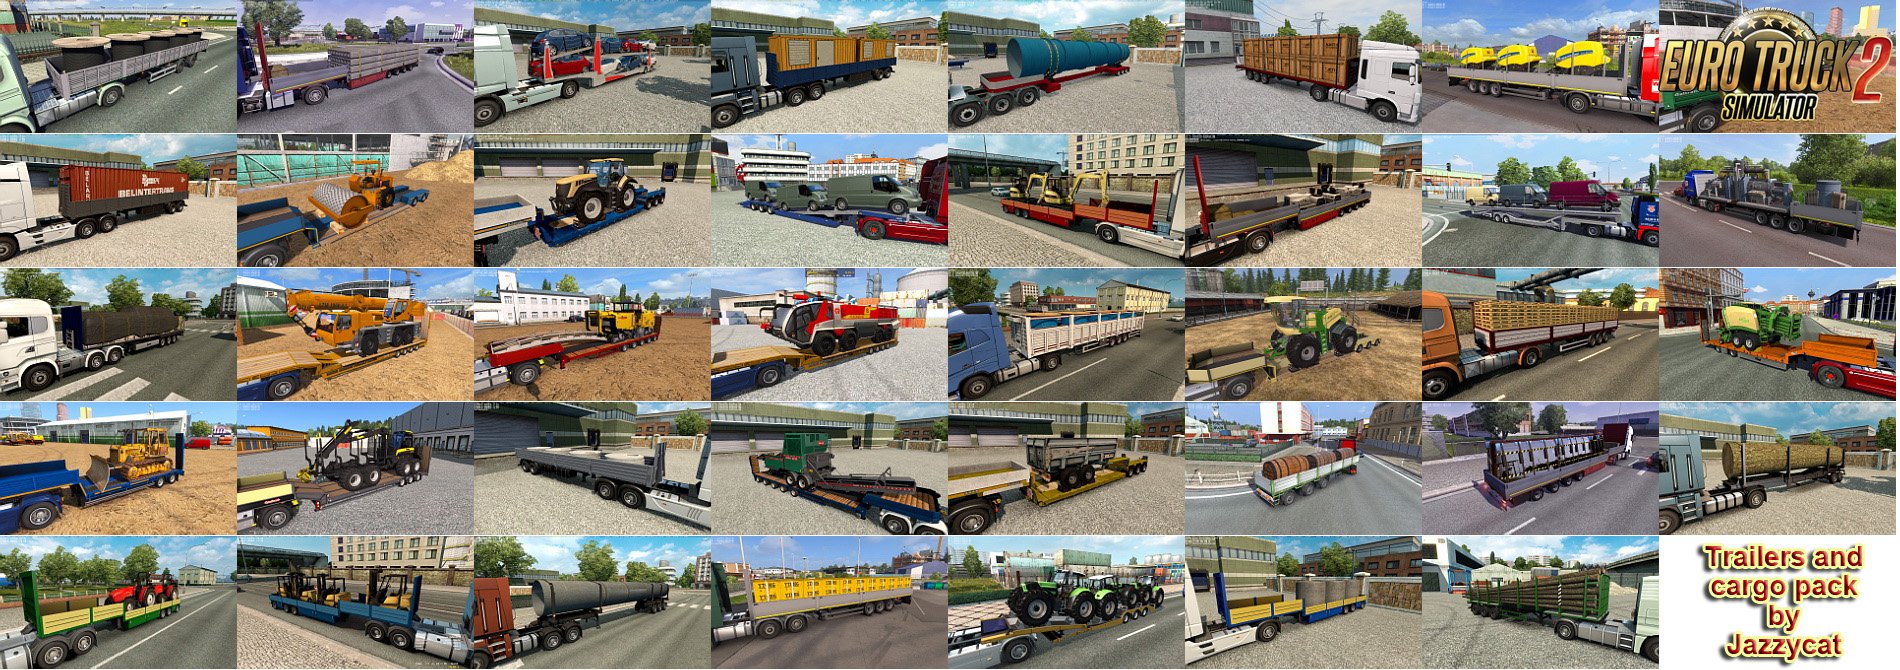 Trailers and Cargo Pack v7.5 by Jazzycat